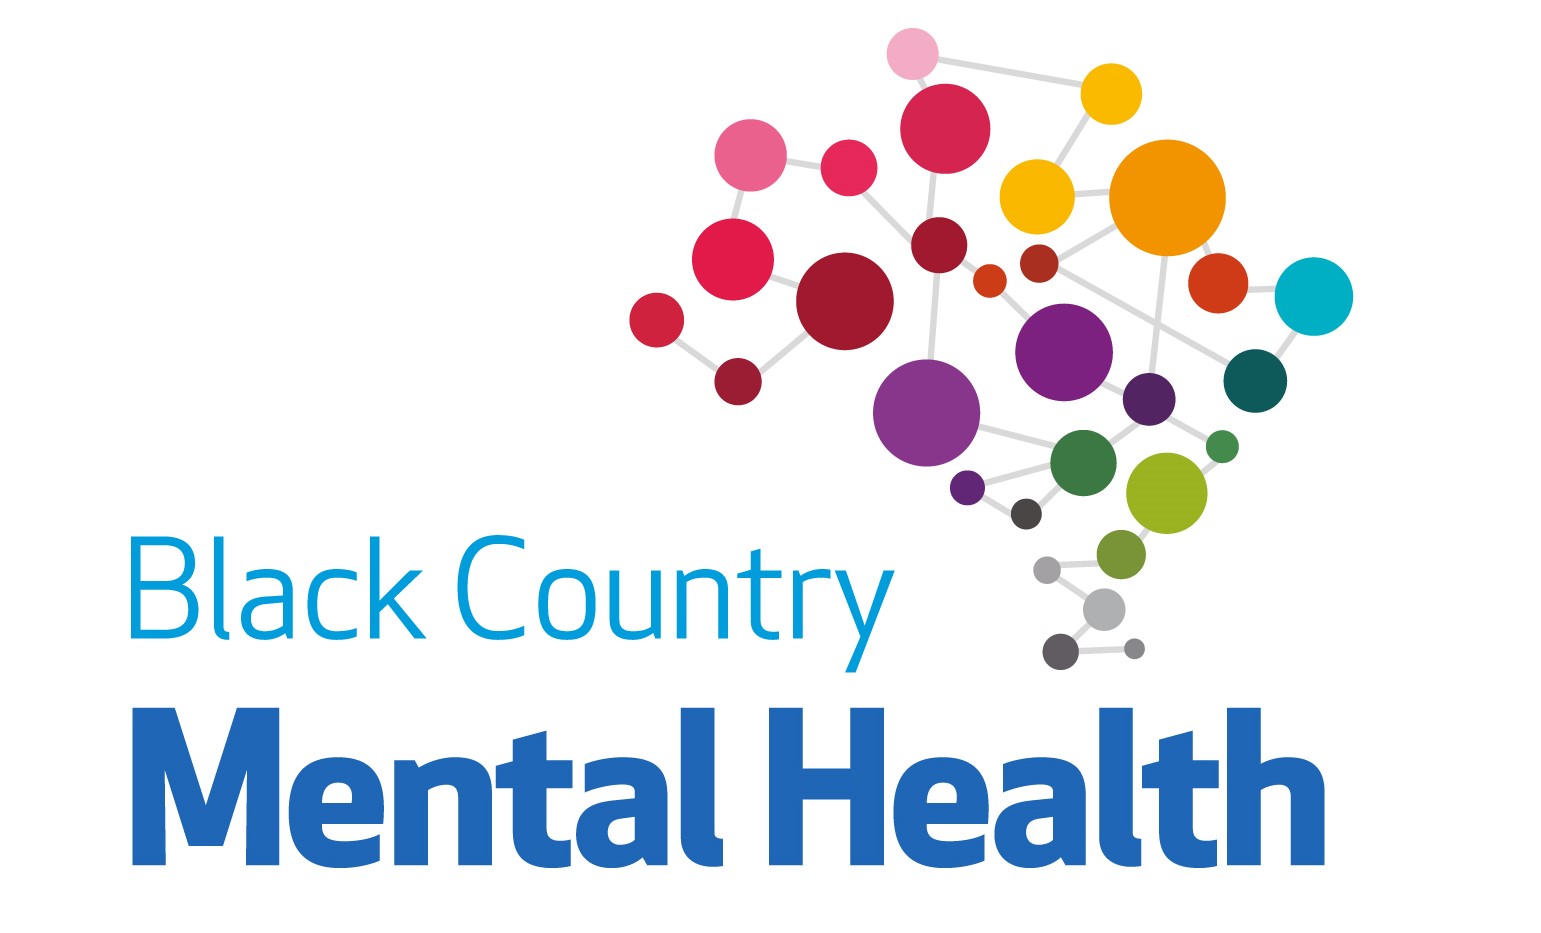 Black Country Mental Health - Bereavement Counseling and Support